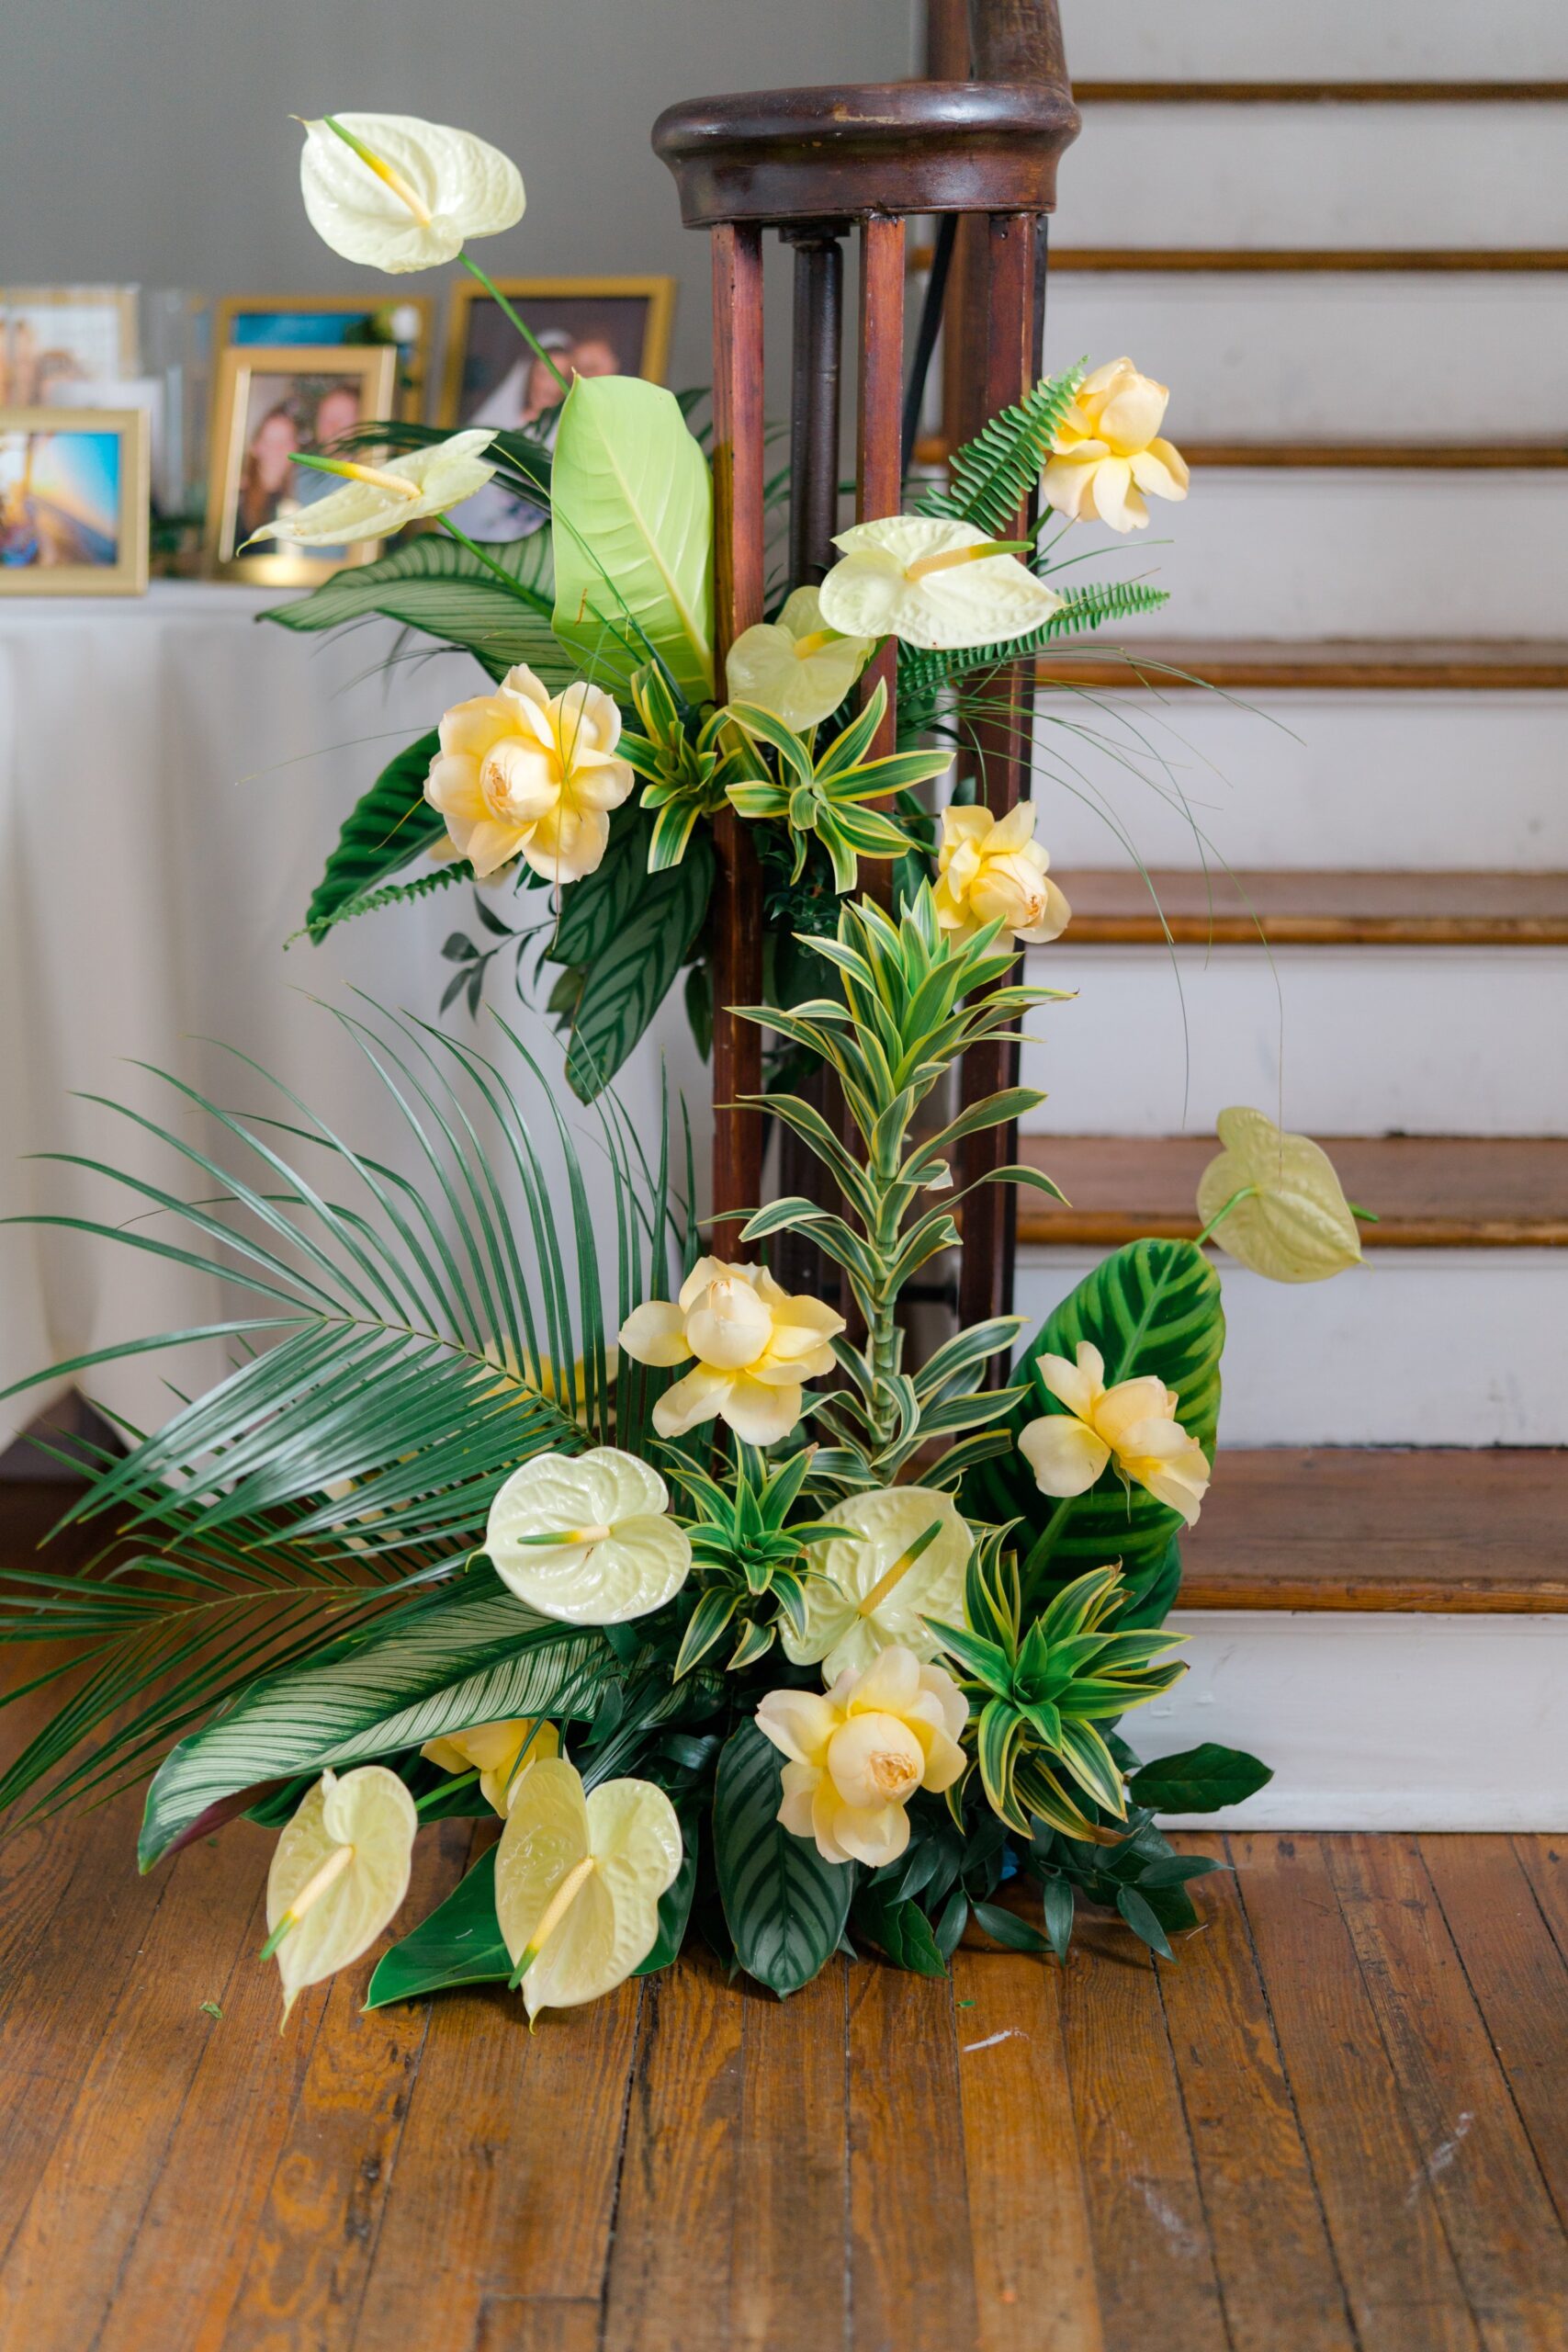 Gadsden House staircase decorated with yellow tropical flowers and greenery.